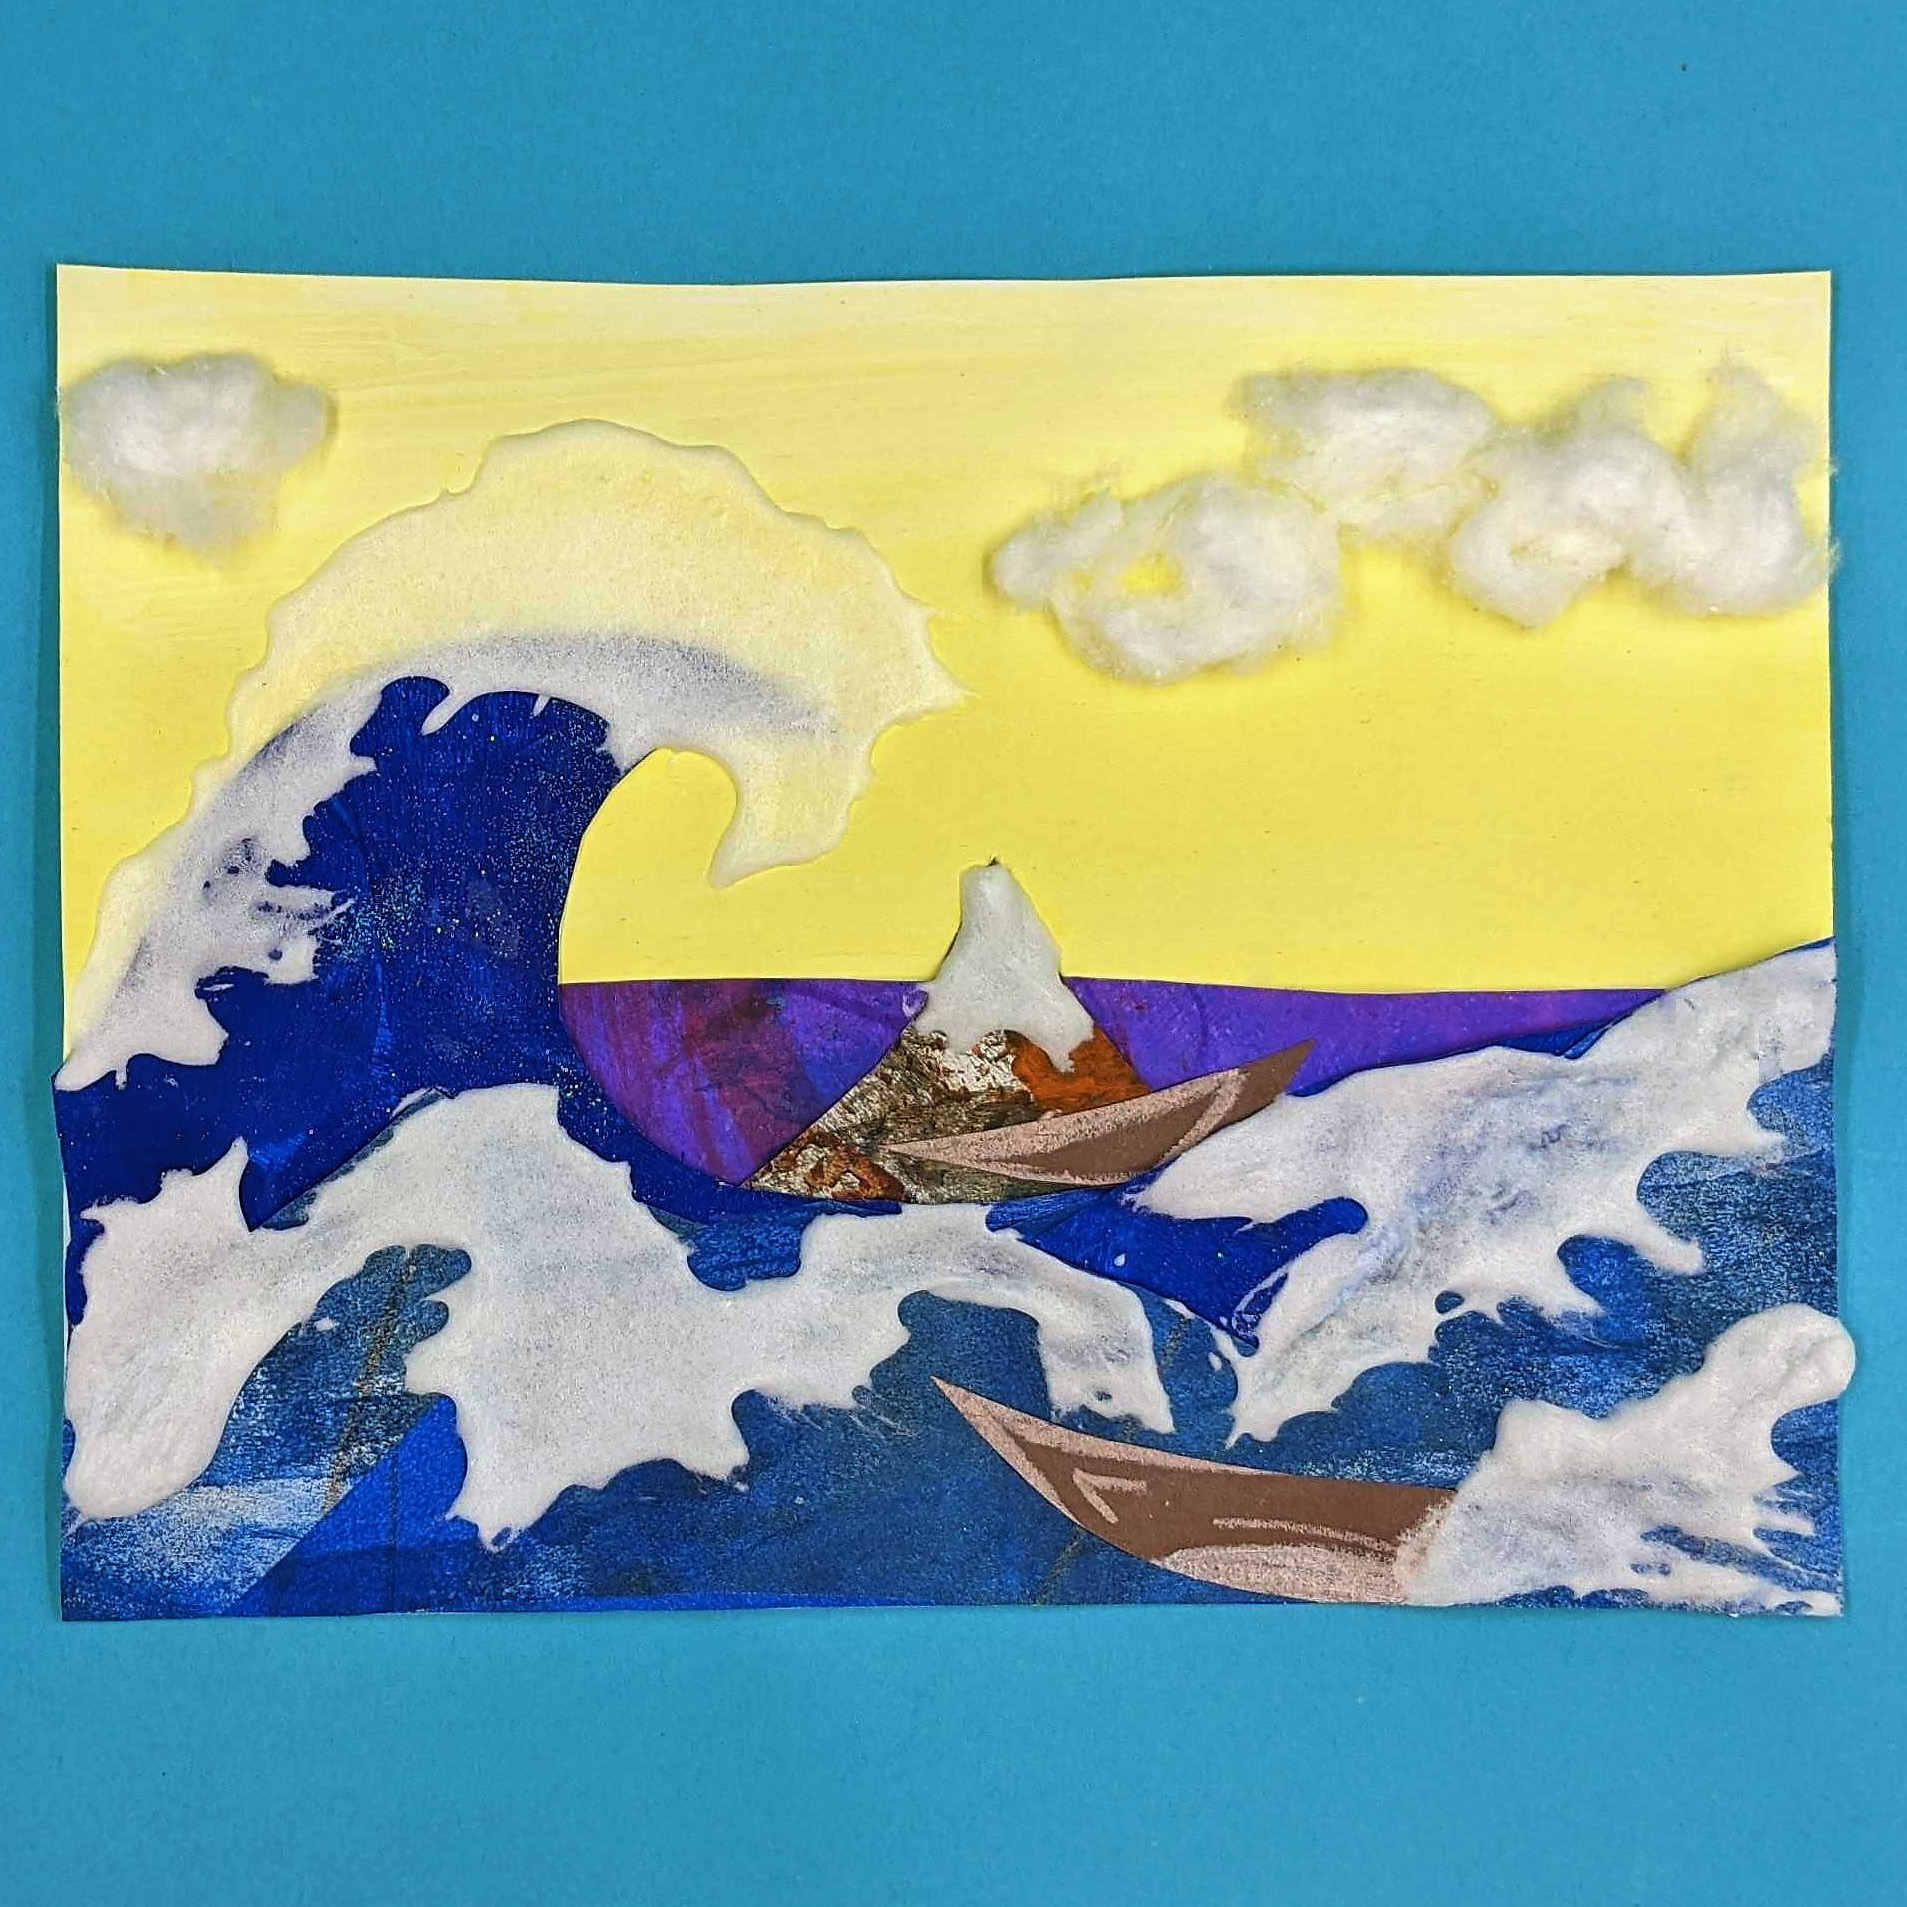 Kidcreate Studio - Houston Greater Heights, Hokusai's the great wave  Art Project